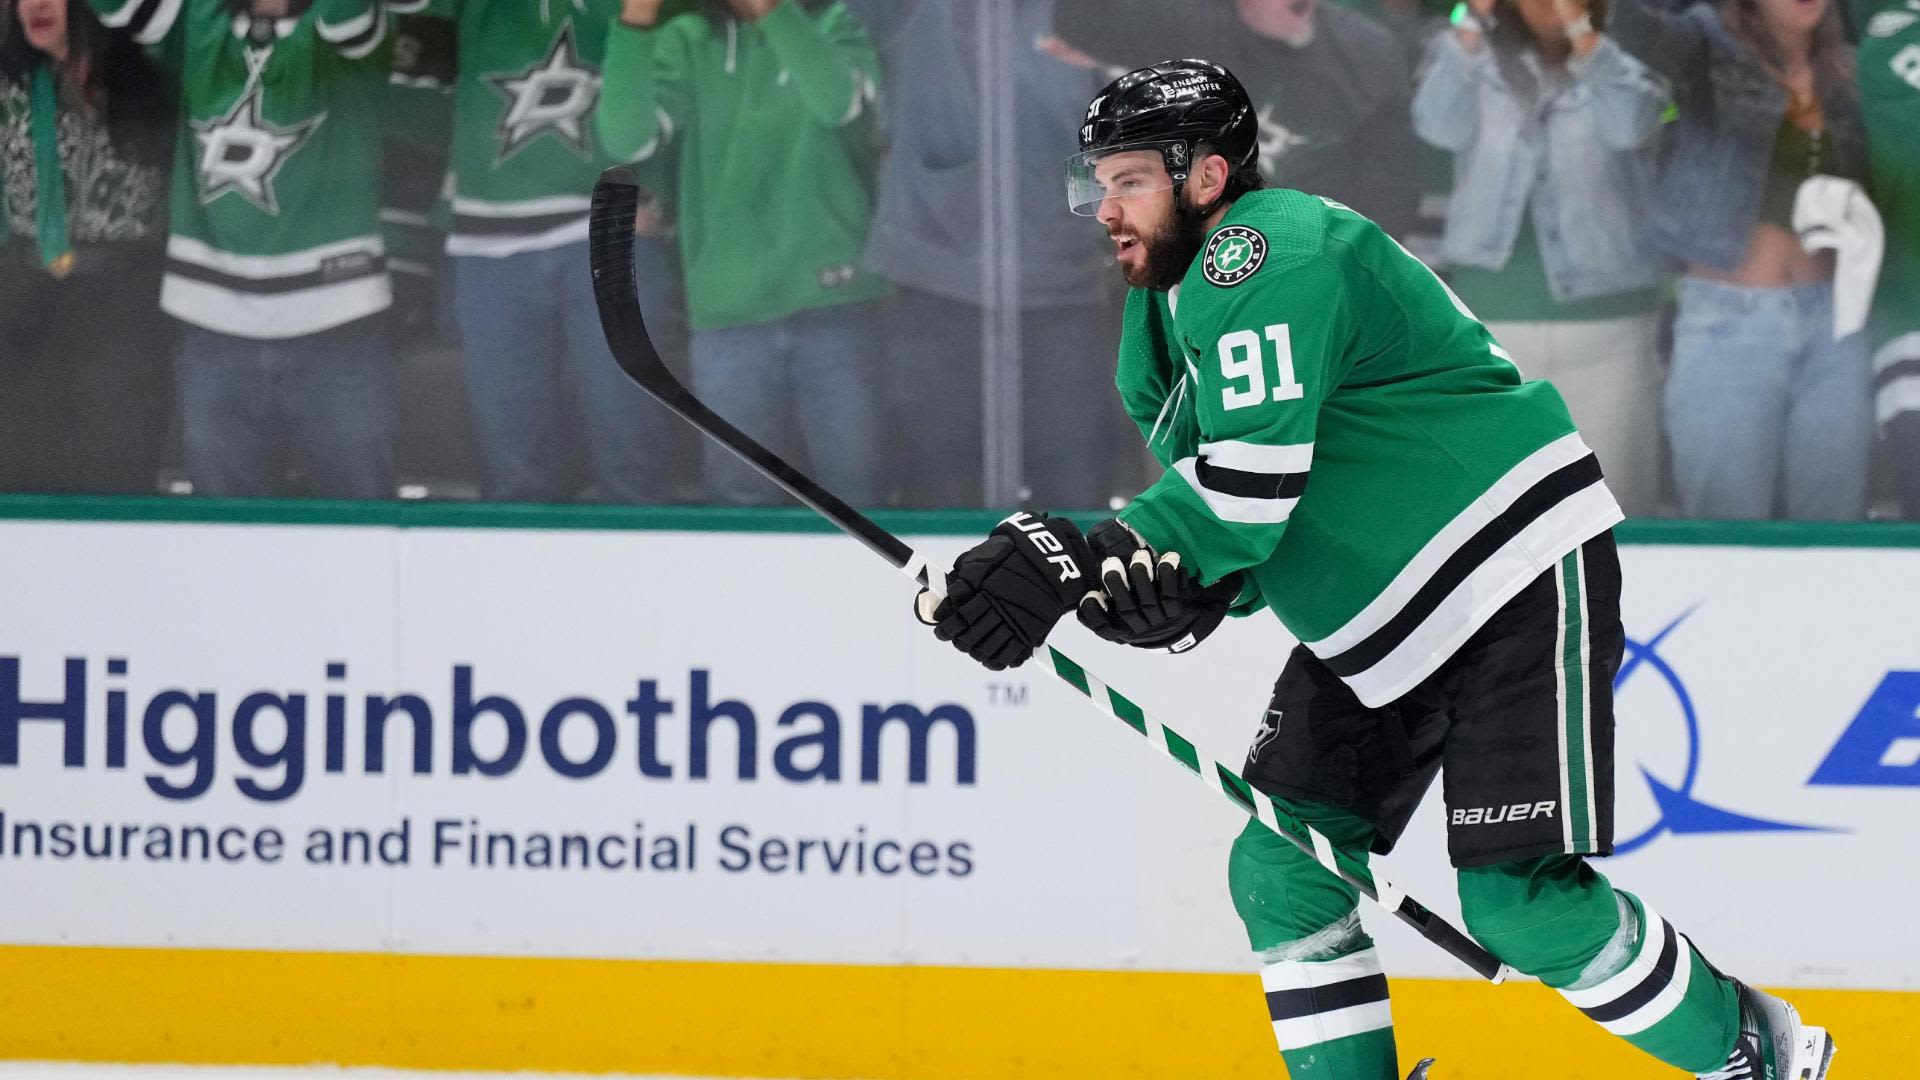 Tyler Seguin's 2nd goal of the game ties it late for Stars - Stream the Video - Watch ESPN